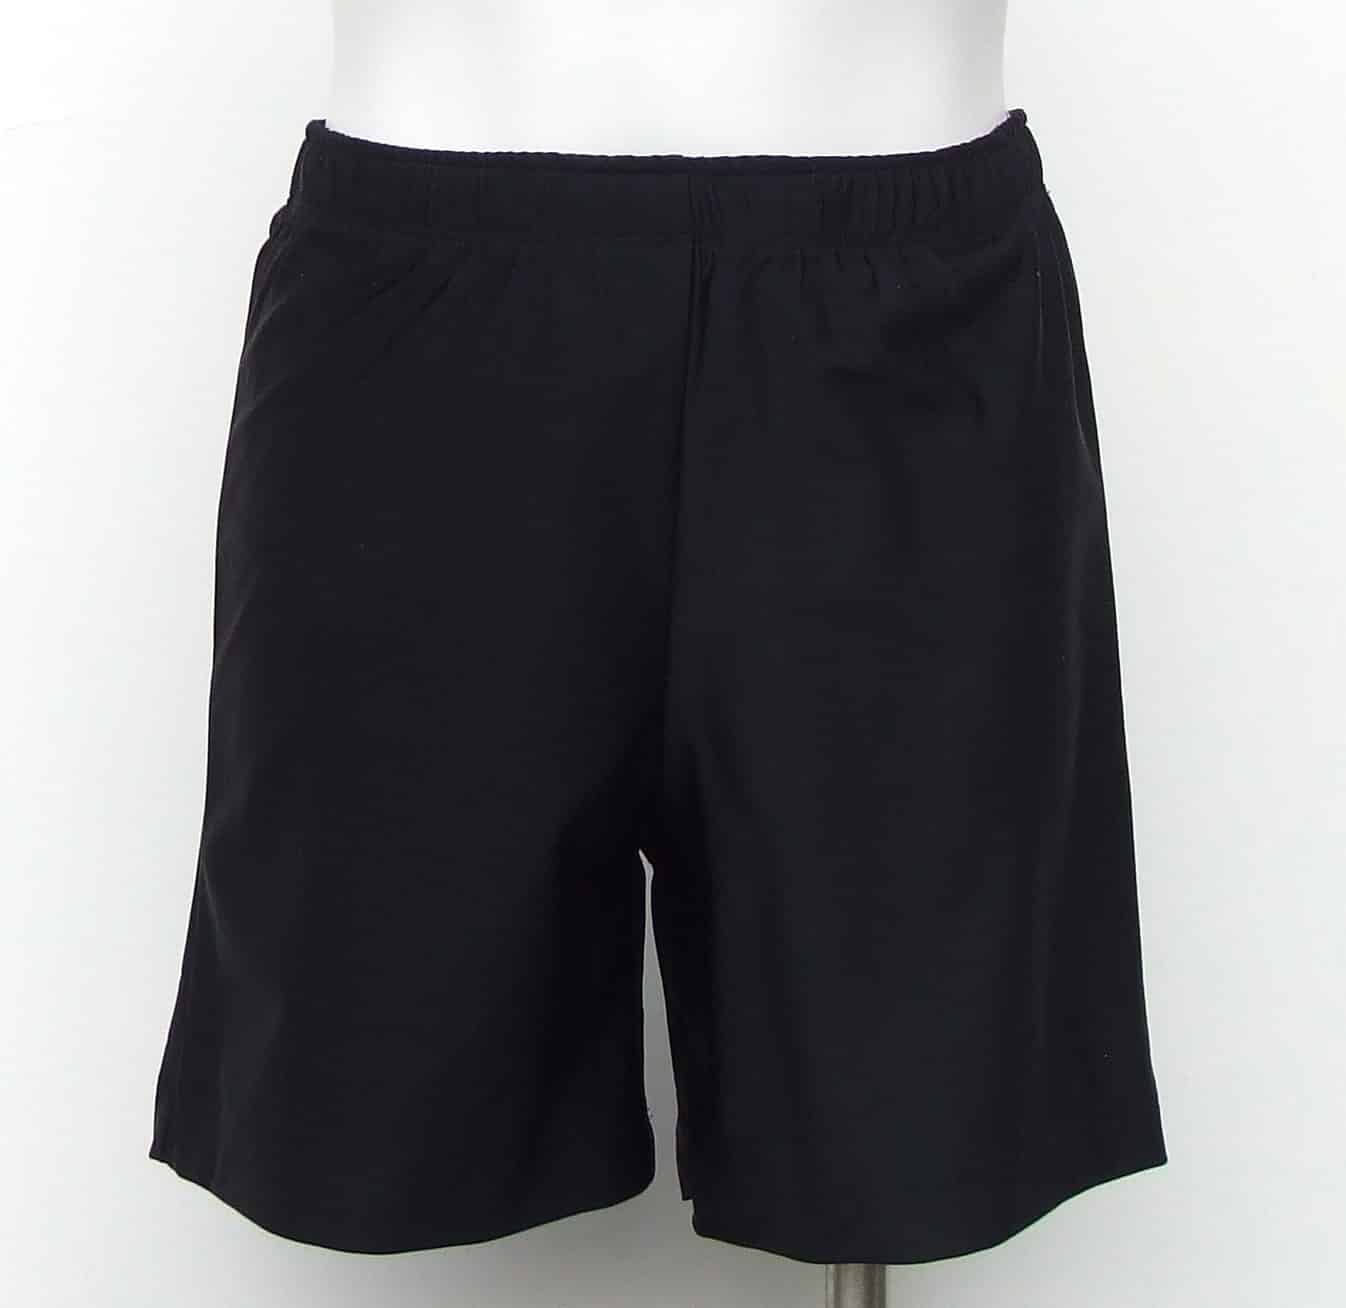 Pien & Polle swim shorts kids and adults